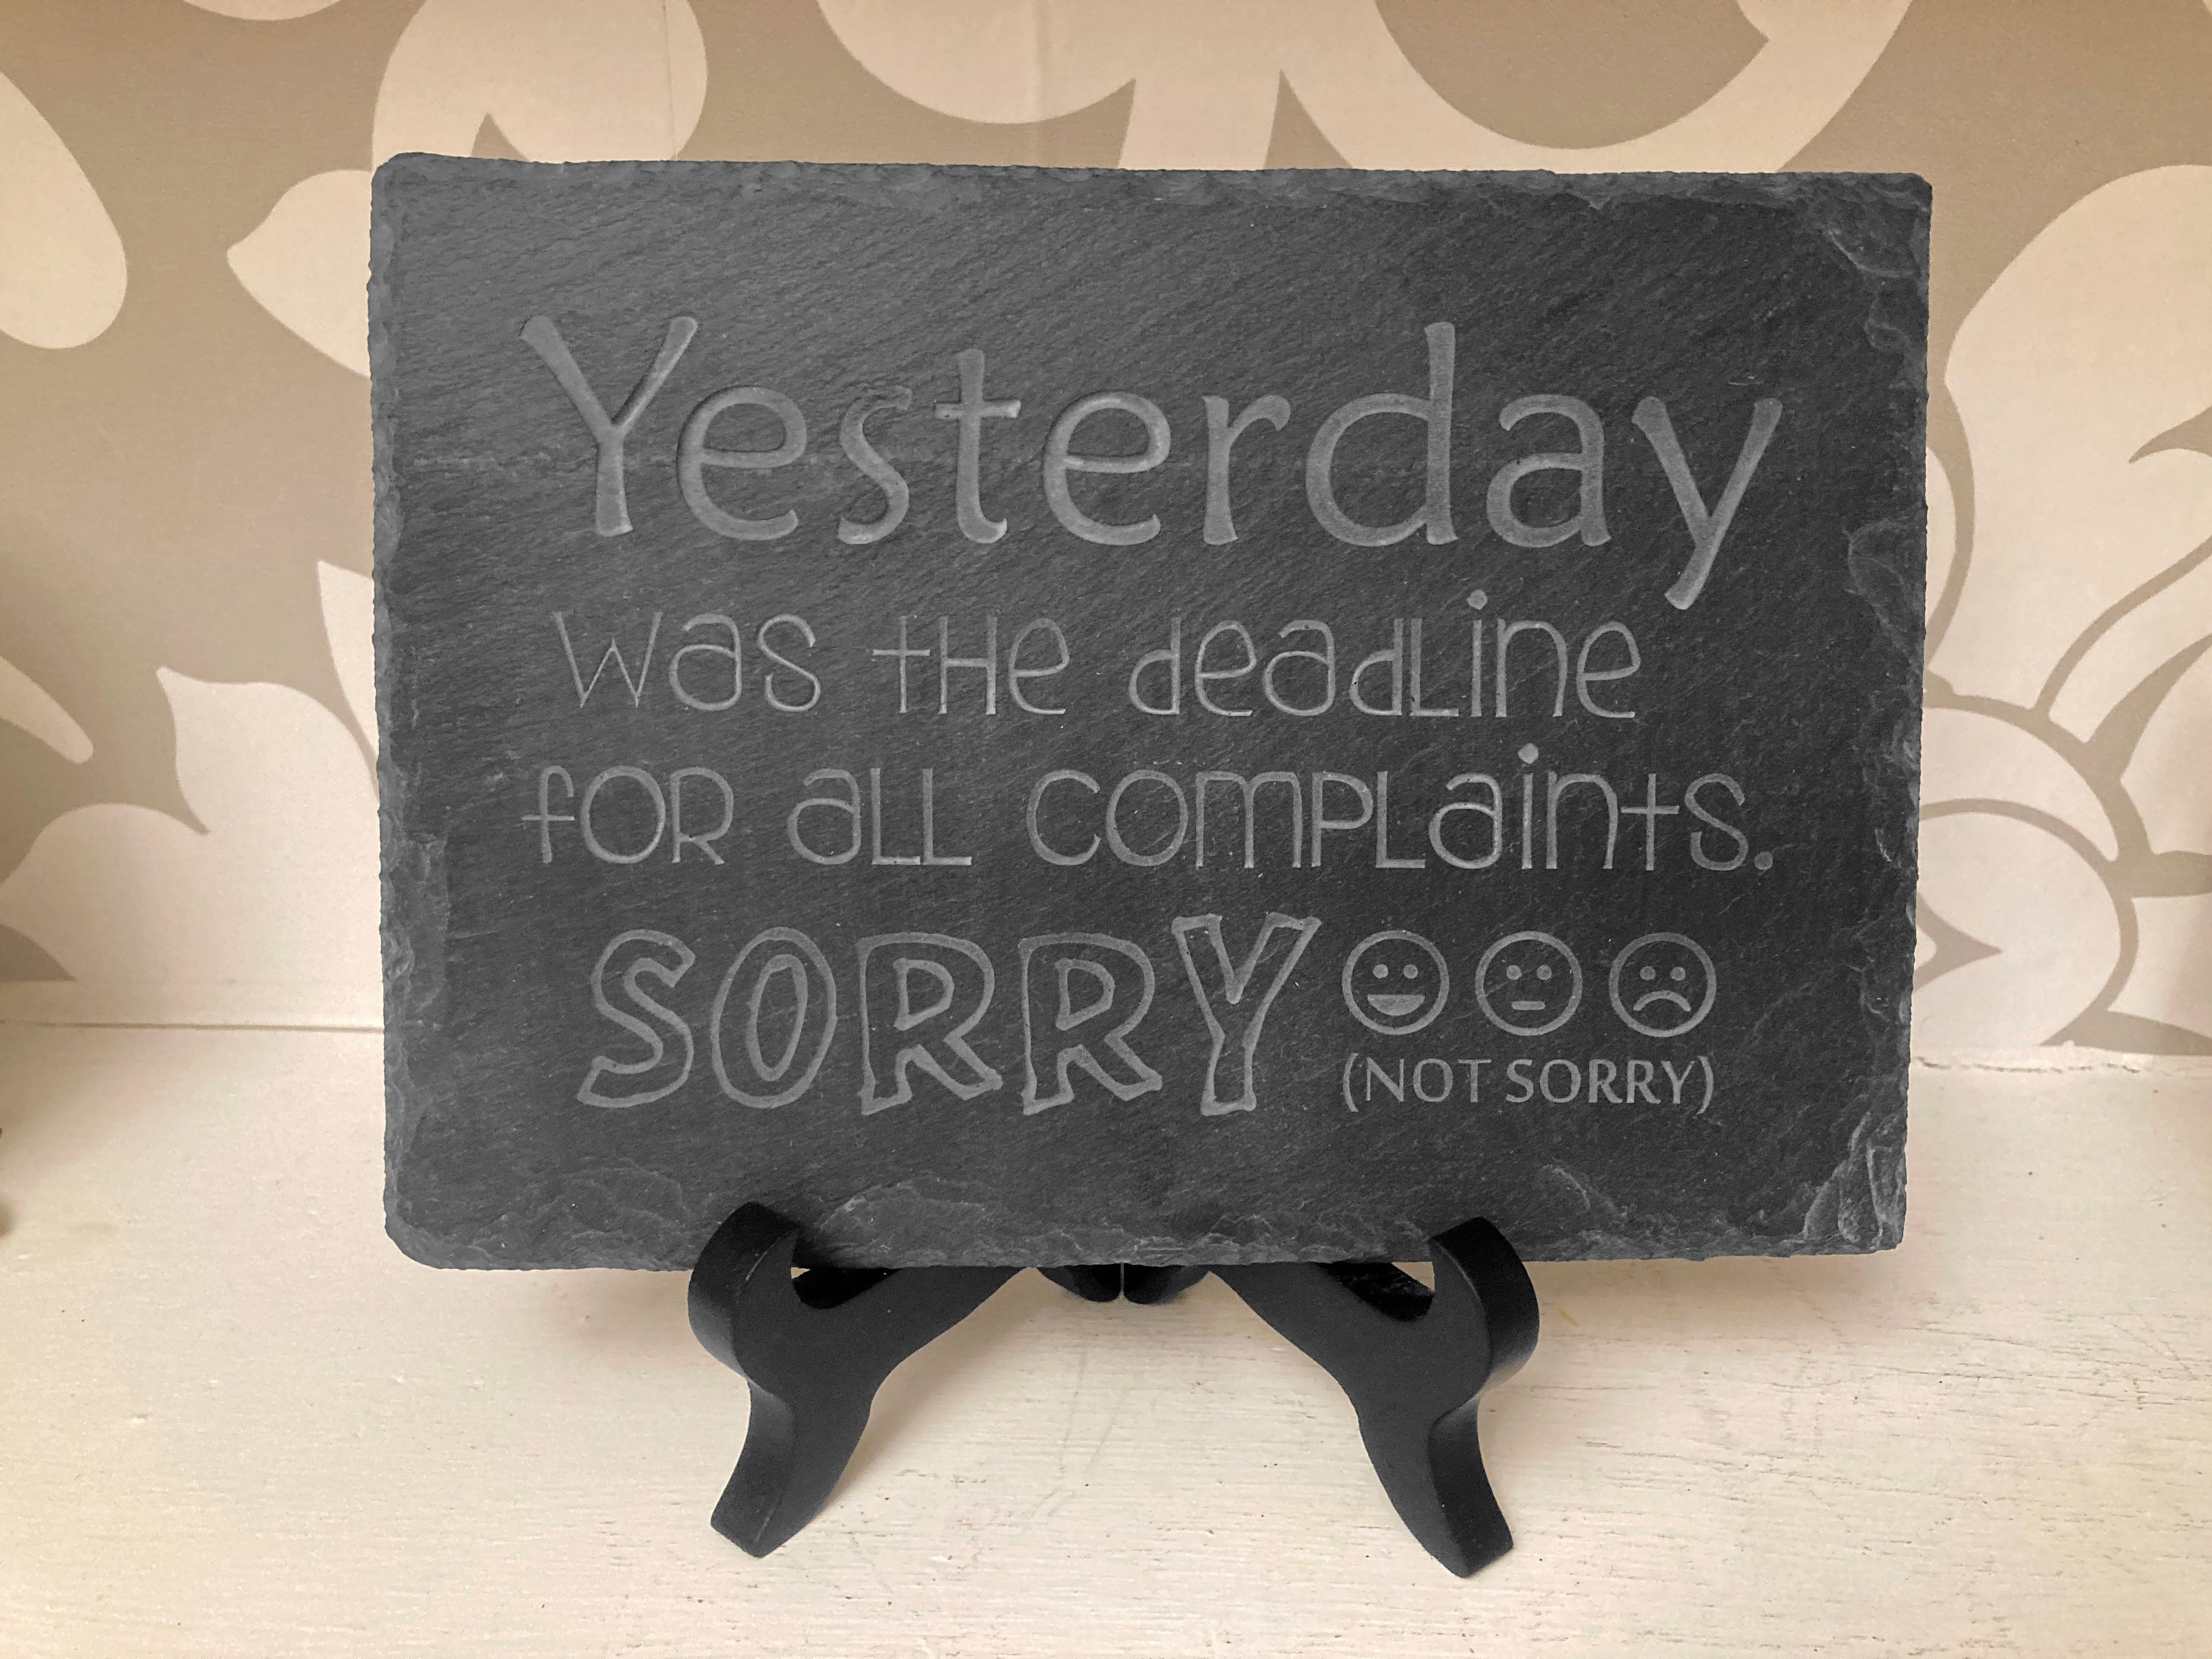 Yesterday was the deadline for all complaints. Sorry, not sorry. Novelty shelf sign desk sign with 4 inch wooden stand.